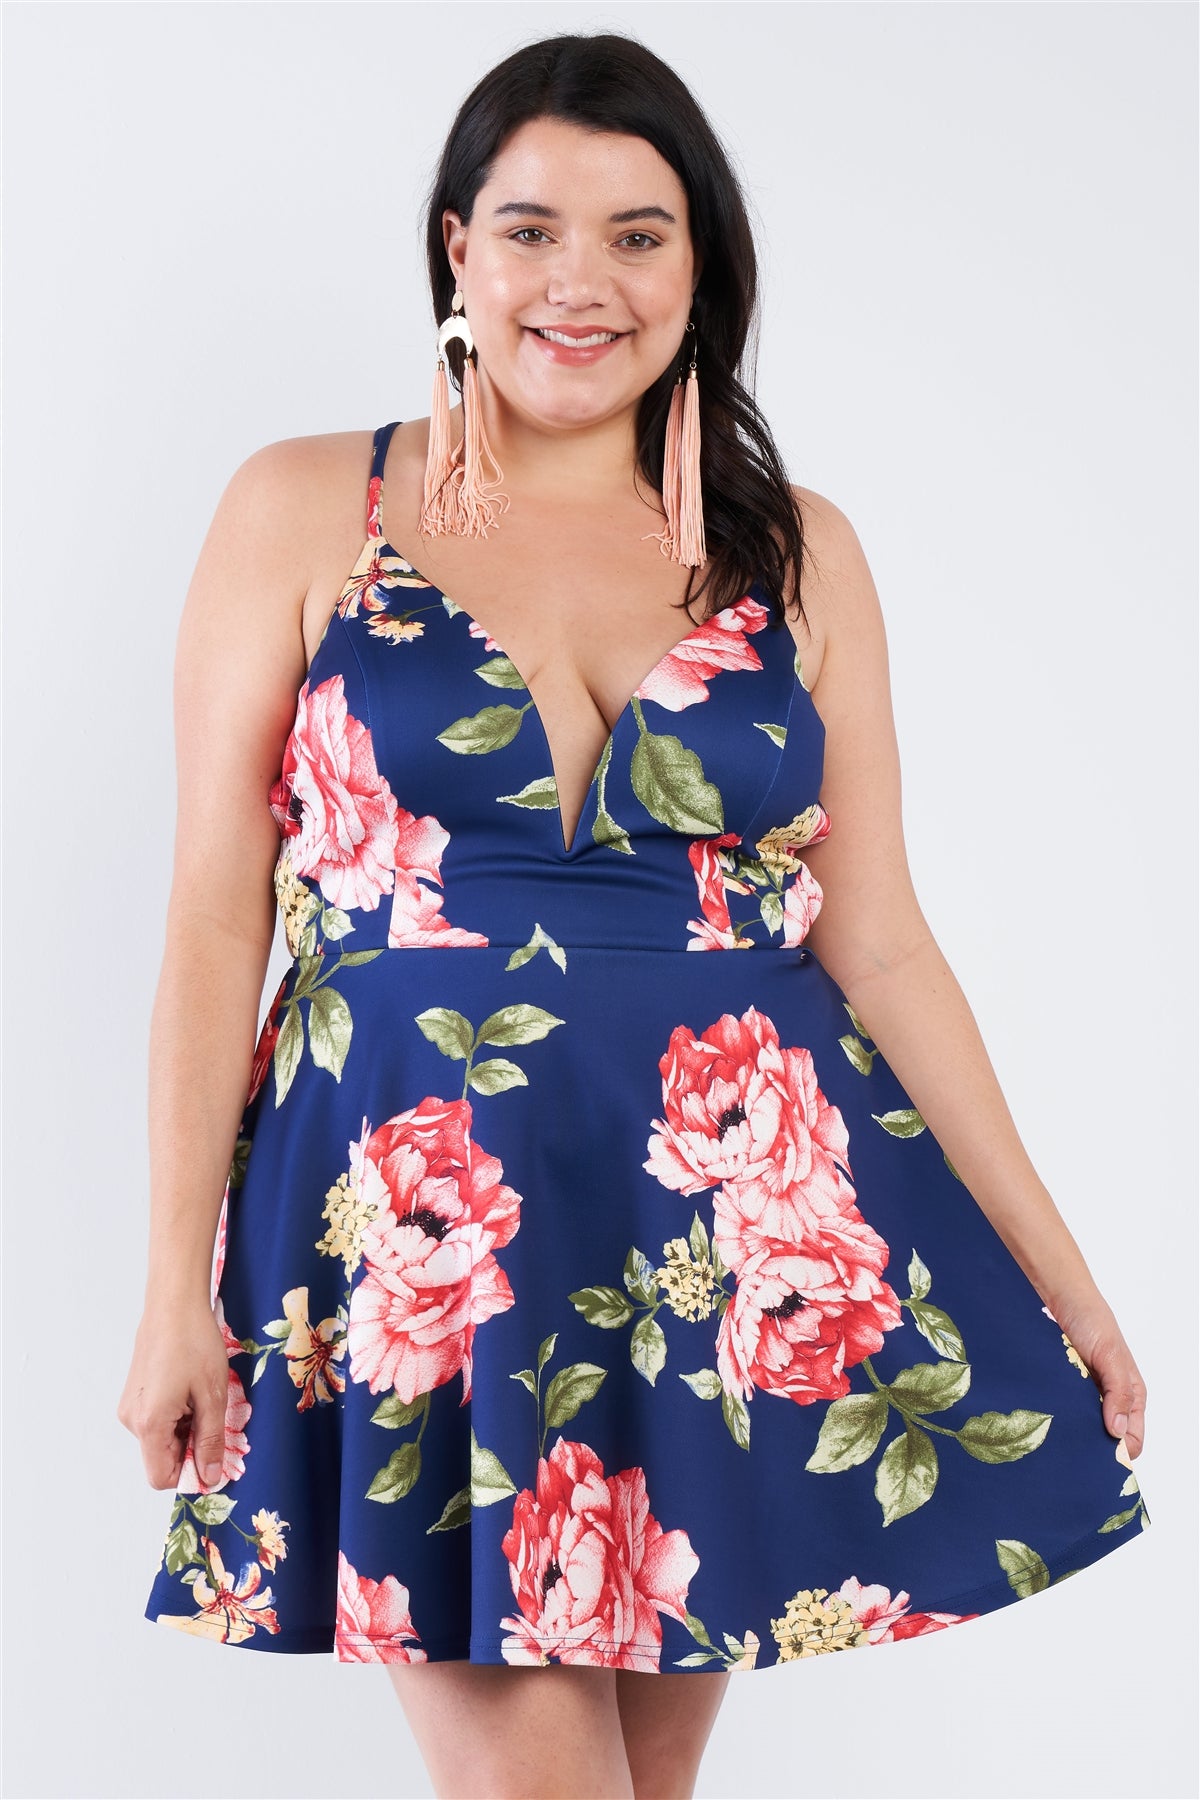 Plus Size Lovely Ladies 95% Polyester 5% Spandex All Over Floral Deep V-neck Open Back Strappy Skater Mini Dress (Navy)